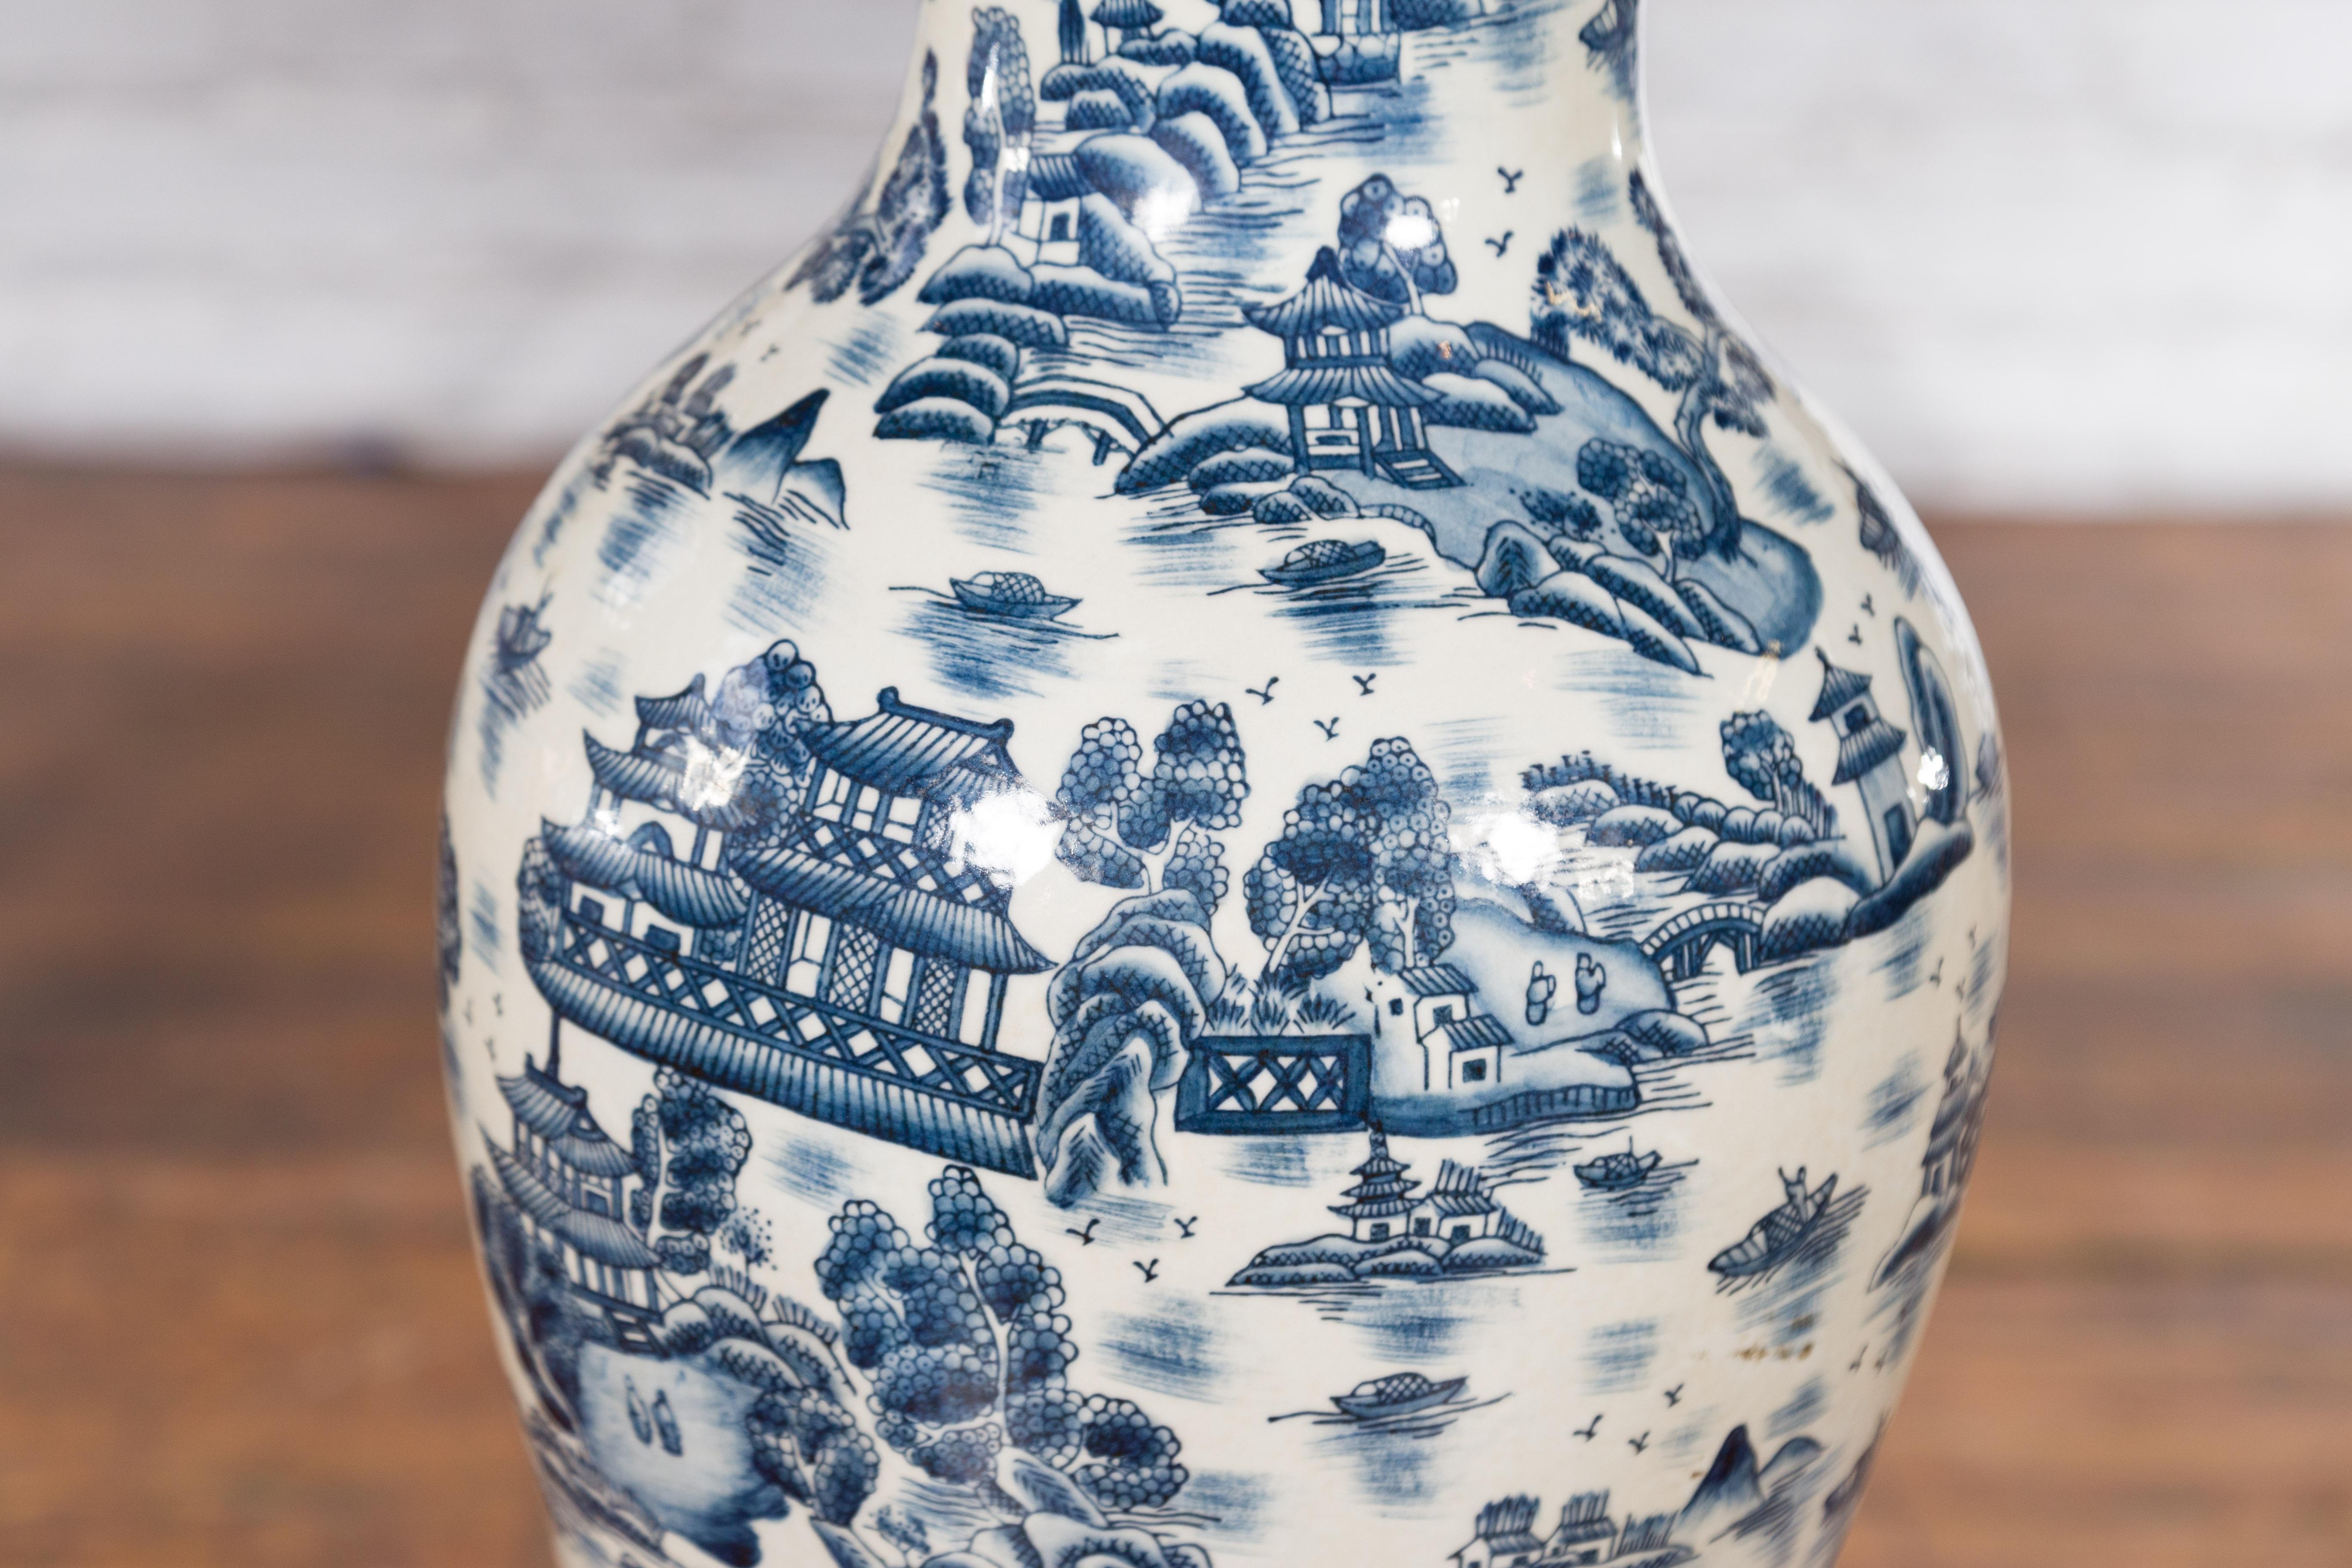 Chinese Vintage Blue and White Porcelain Vase with Landscapes and Architectures For Sale 4